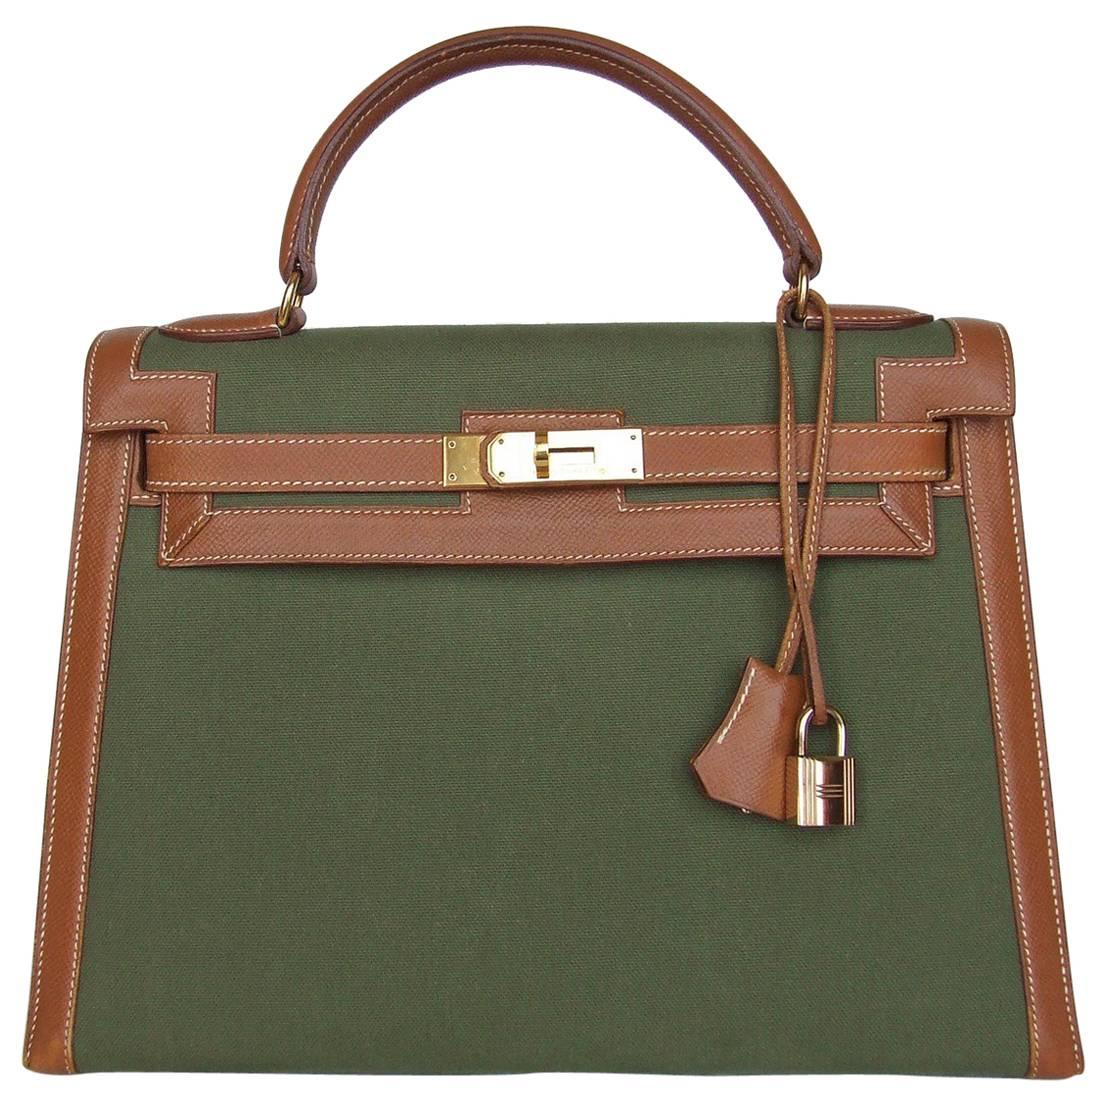 Hermes Kelly 32 Sellier Bag Bi Matiere Green Canvas Cognac Leather GHW Rare 